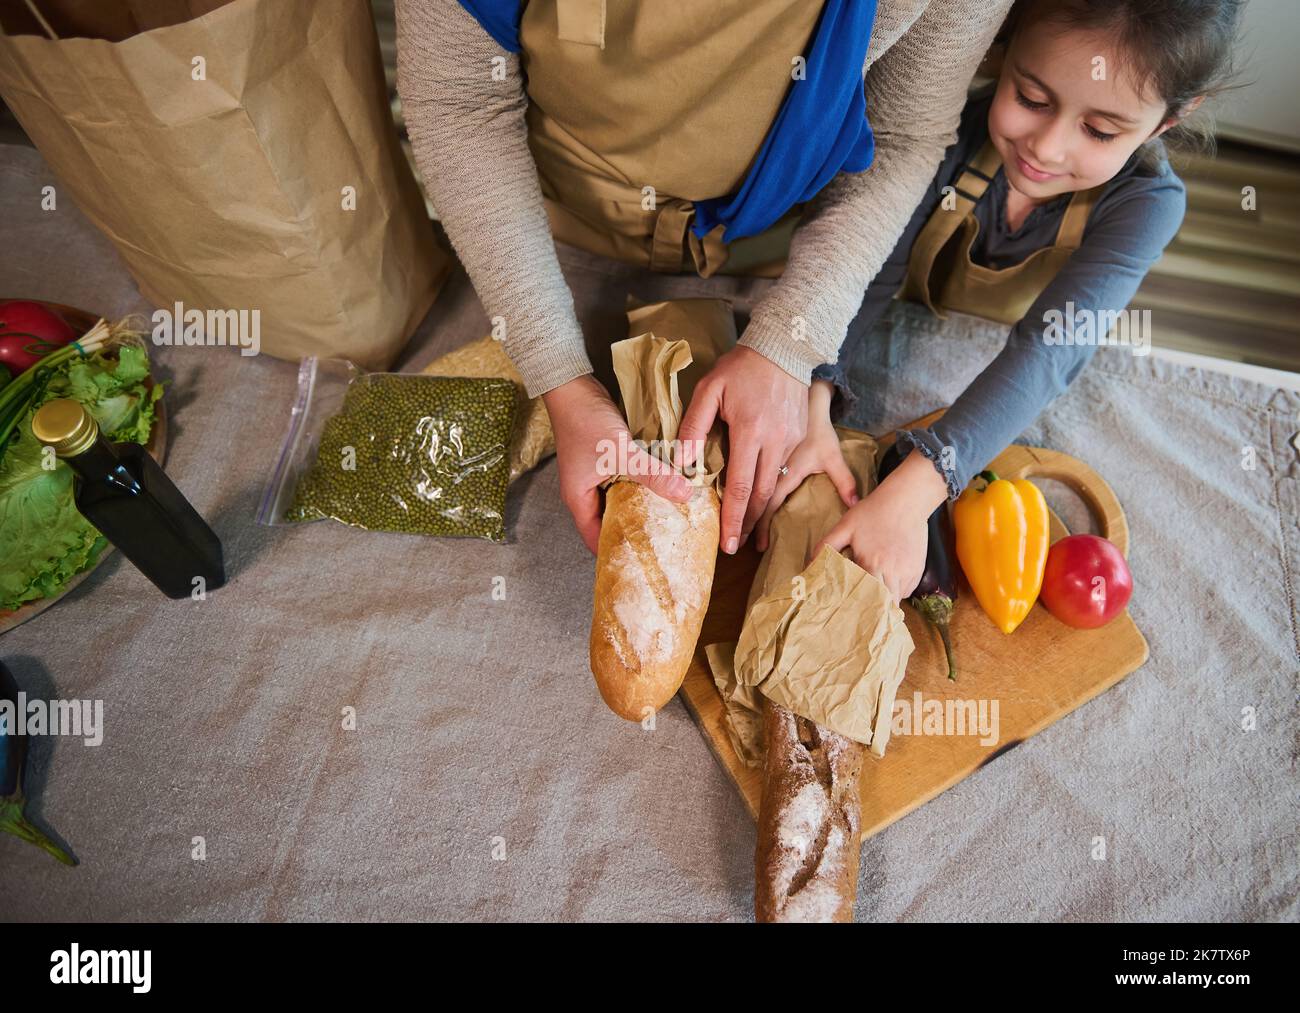 Overhead view of woman with little daughter unpacking food, and loaves of bread from grocery bag together in the kitchen Stock Photo